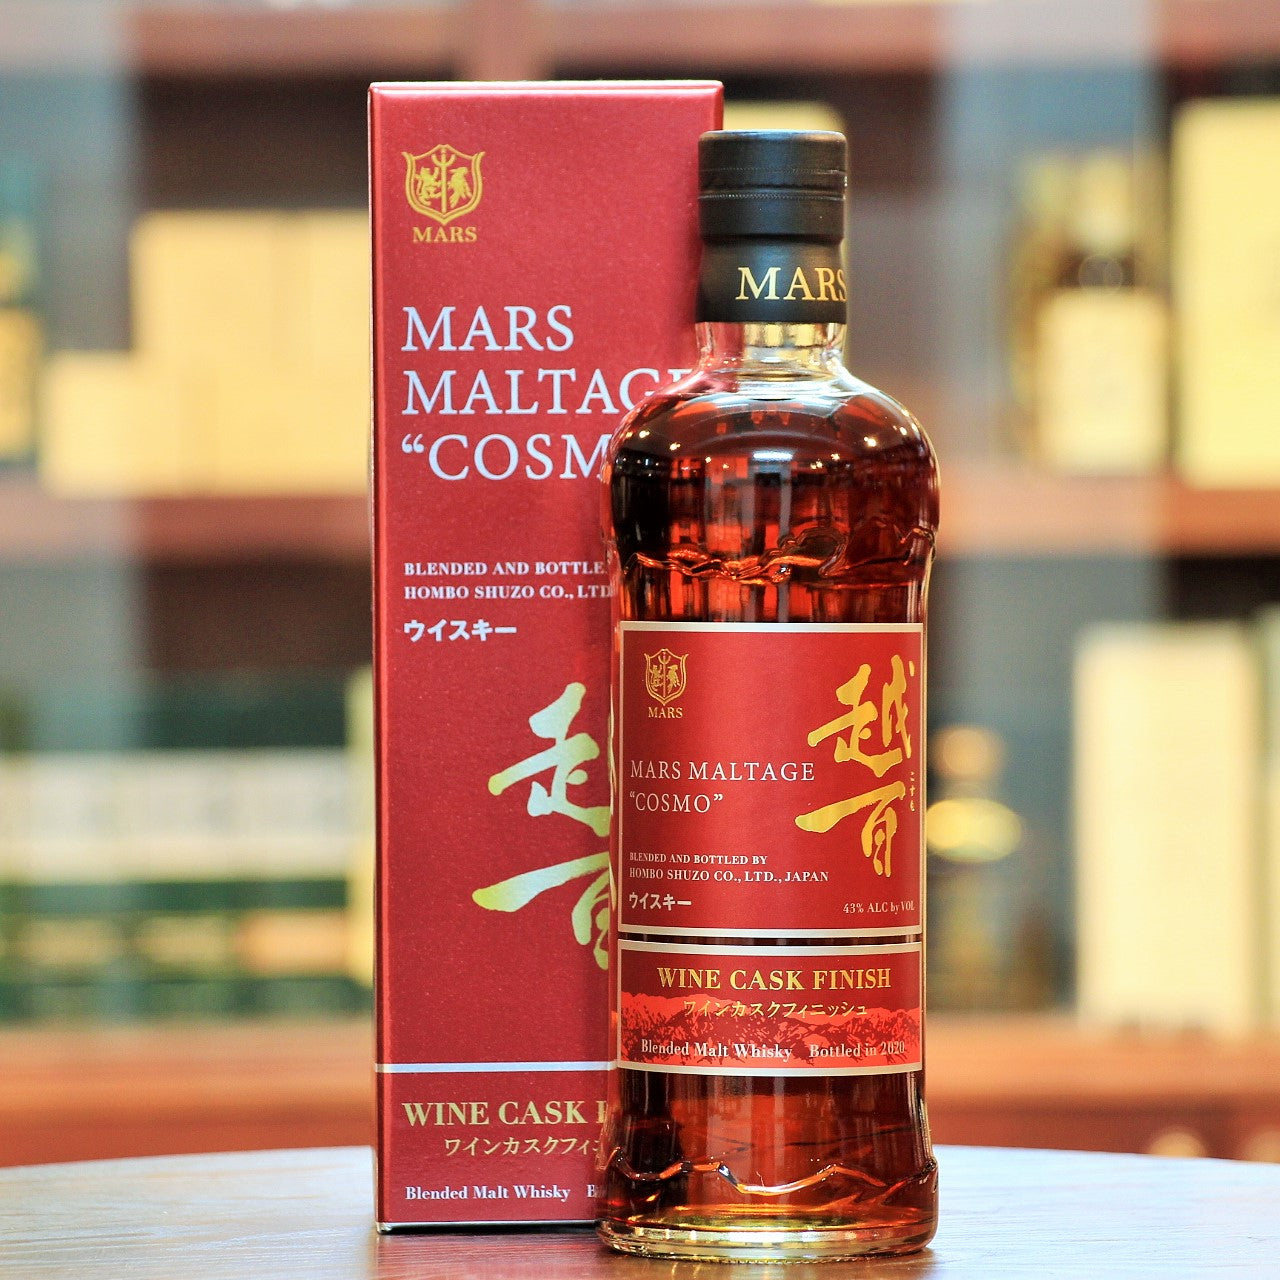 A wonderfuly ruby red wine cask finished blended whisky from Mars Whisky.